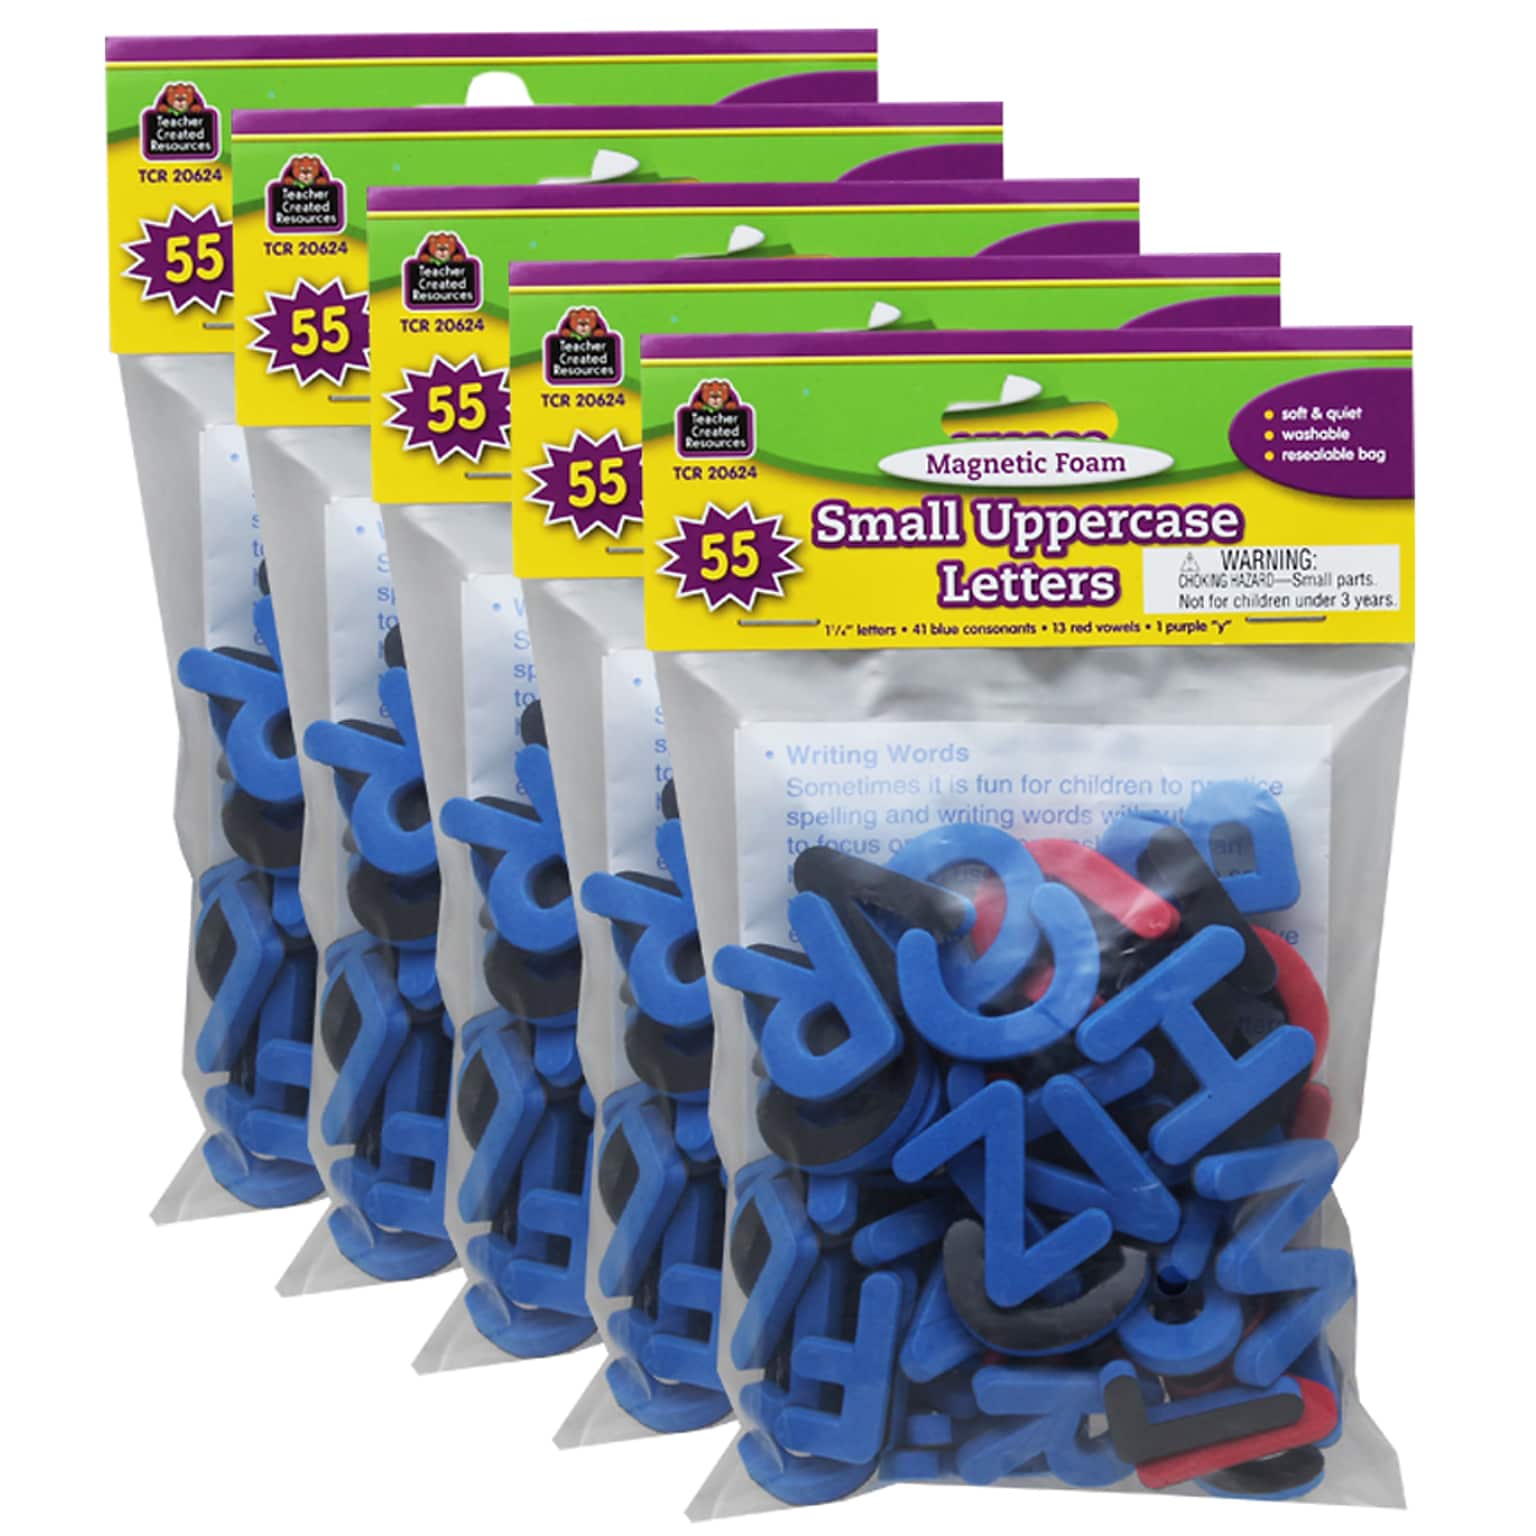 Teacher Created Resources 1.25 Magnetic Foam Small Uppercase Letters, Assorted Colors, 55/Pack, 5 Packs (TCR20624-5)